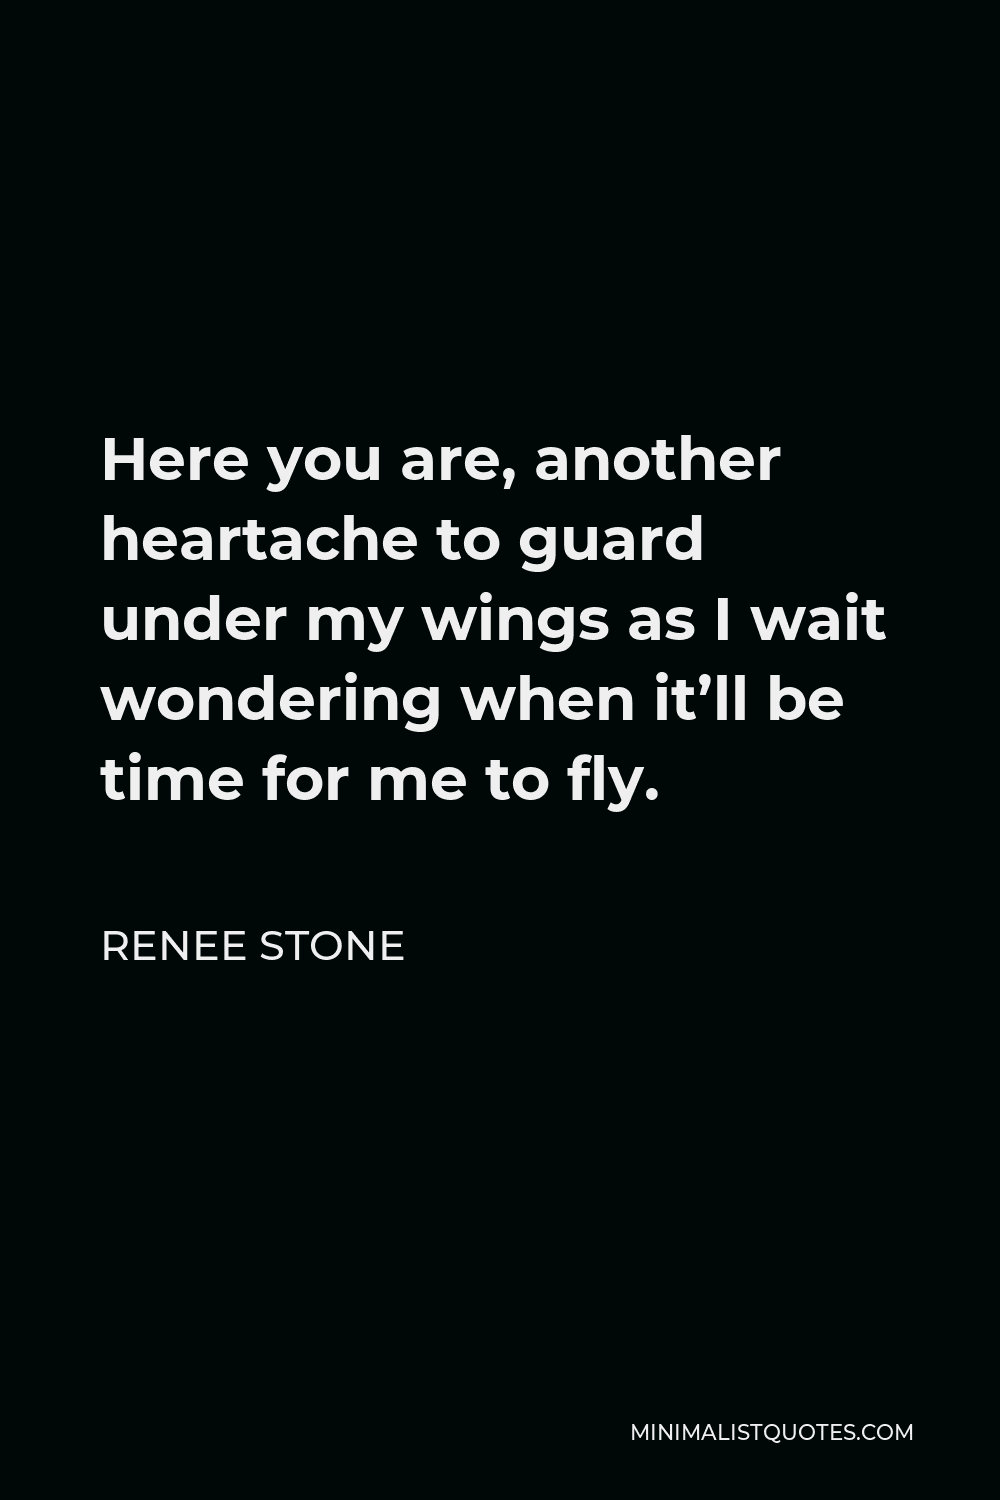 Renee Stone Quote - Here you are, another heartache to guard under my wings as I wait wondering when it’ll be time for me to fly.